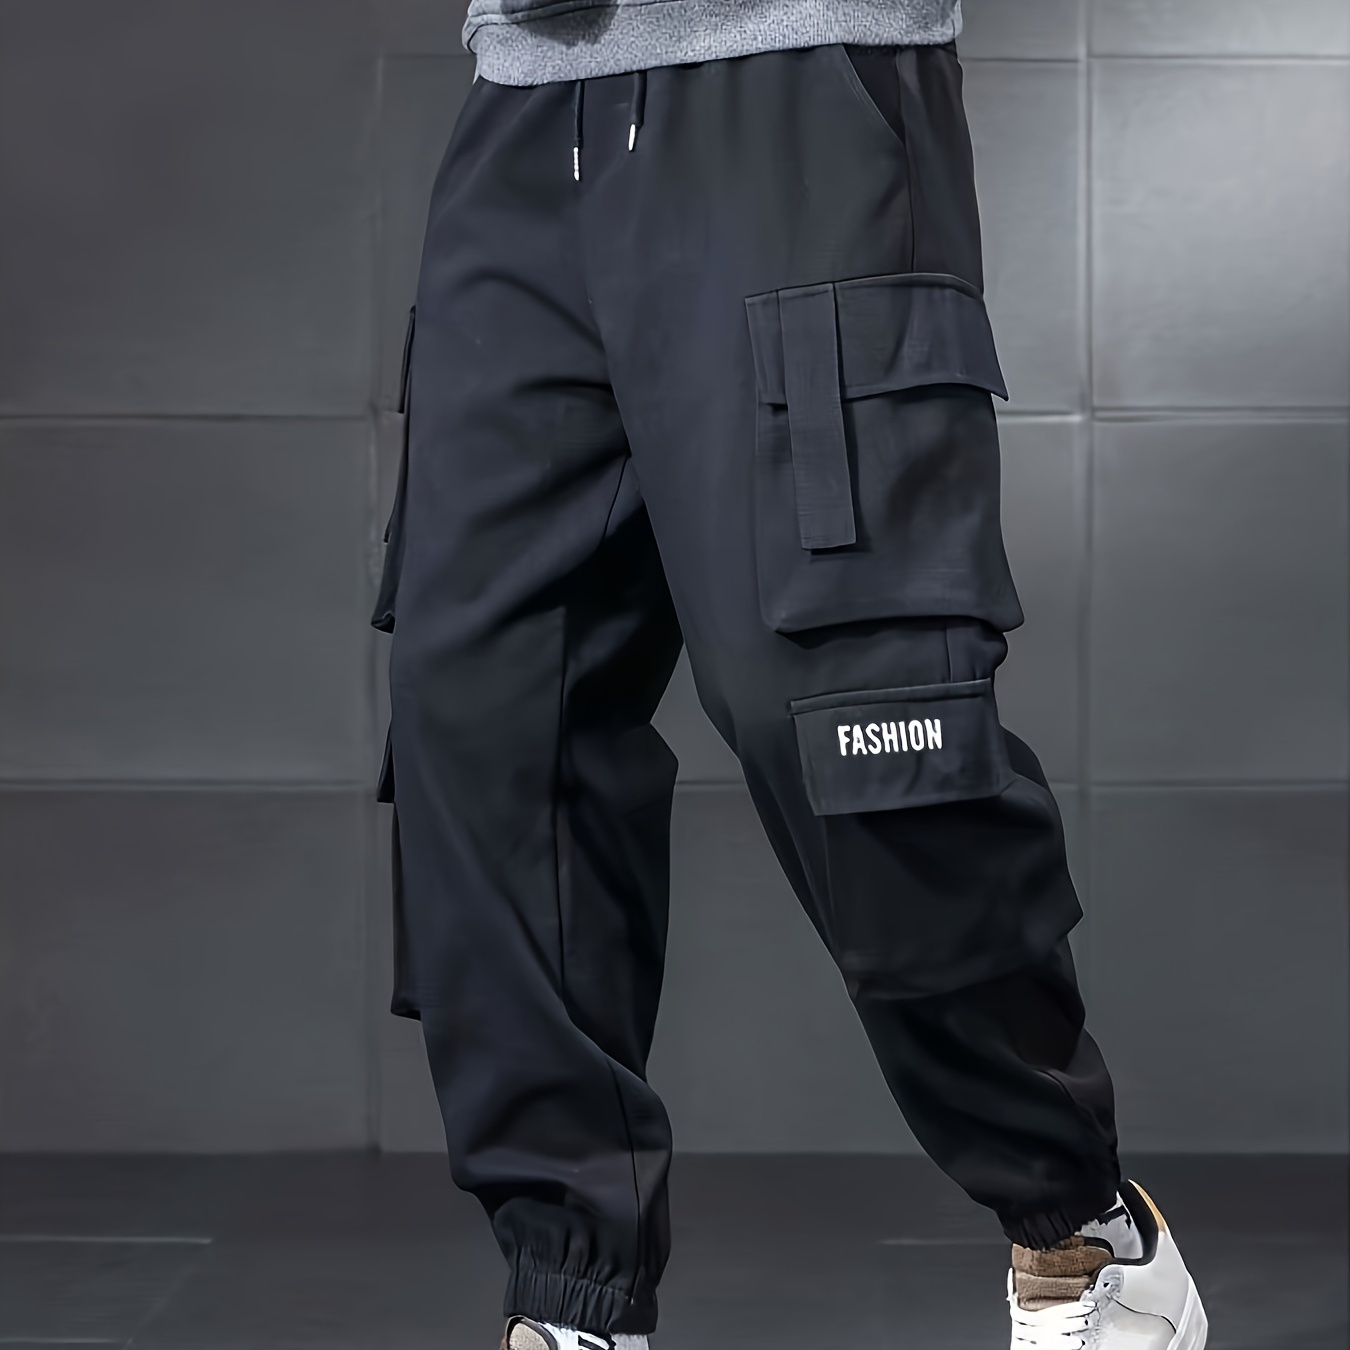 

Boys Casual Fashion Letter Print Cargo Pants, Elastic Waist Jogger Pants With Pocket, Kids Clothes Outdoor